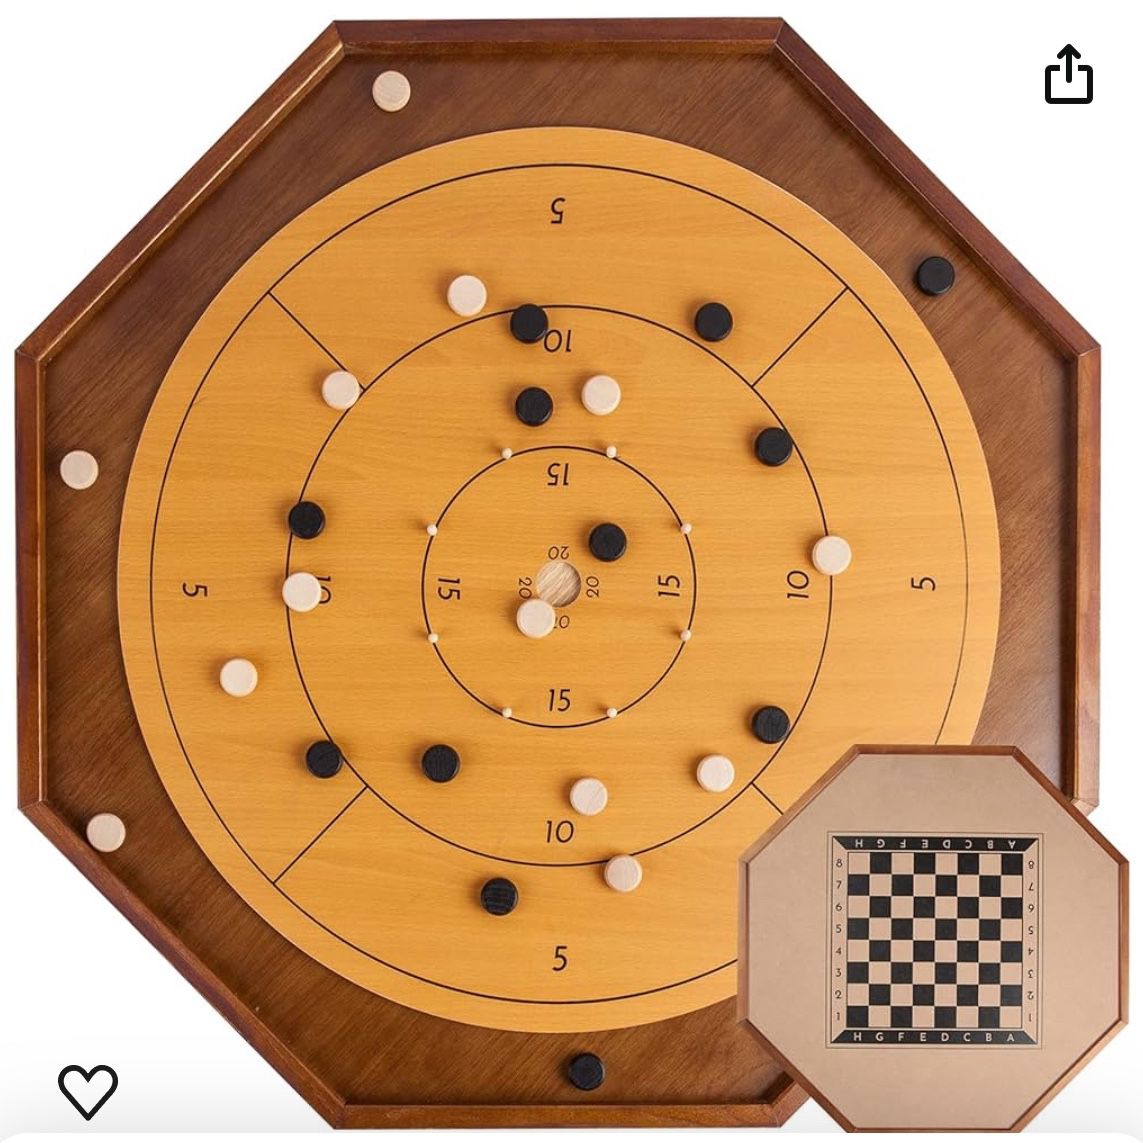 Tournament Crokinole and Checkers, 30-Inch Official Crokinole Board Game with 26" Playing Surface, Canadian Heritage Tabletop Game for Two Players, De